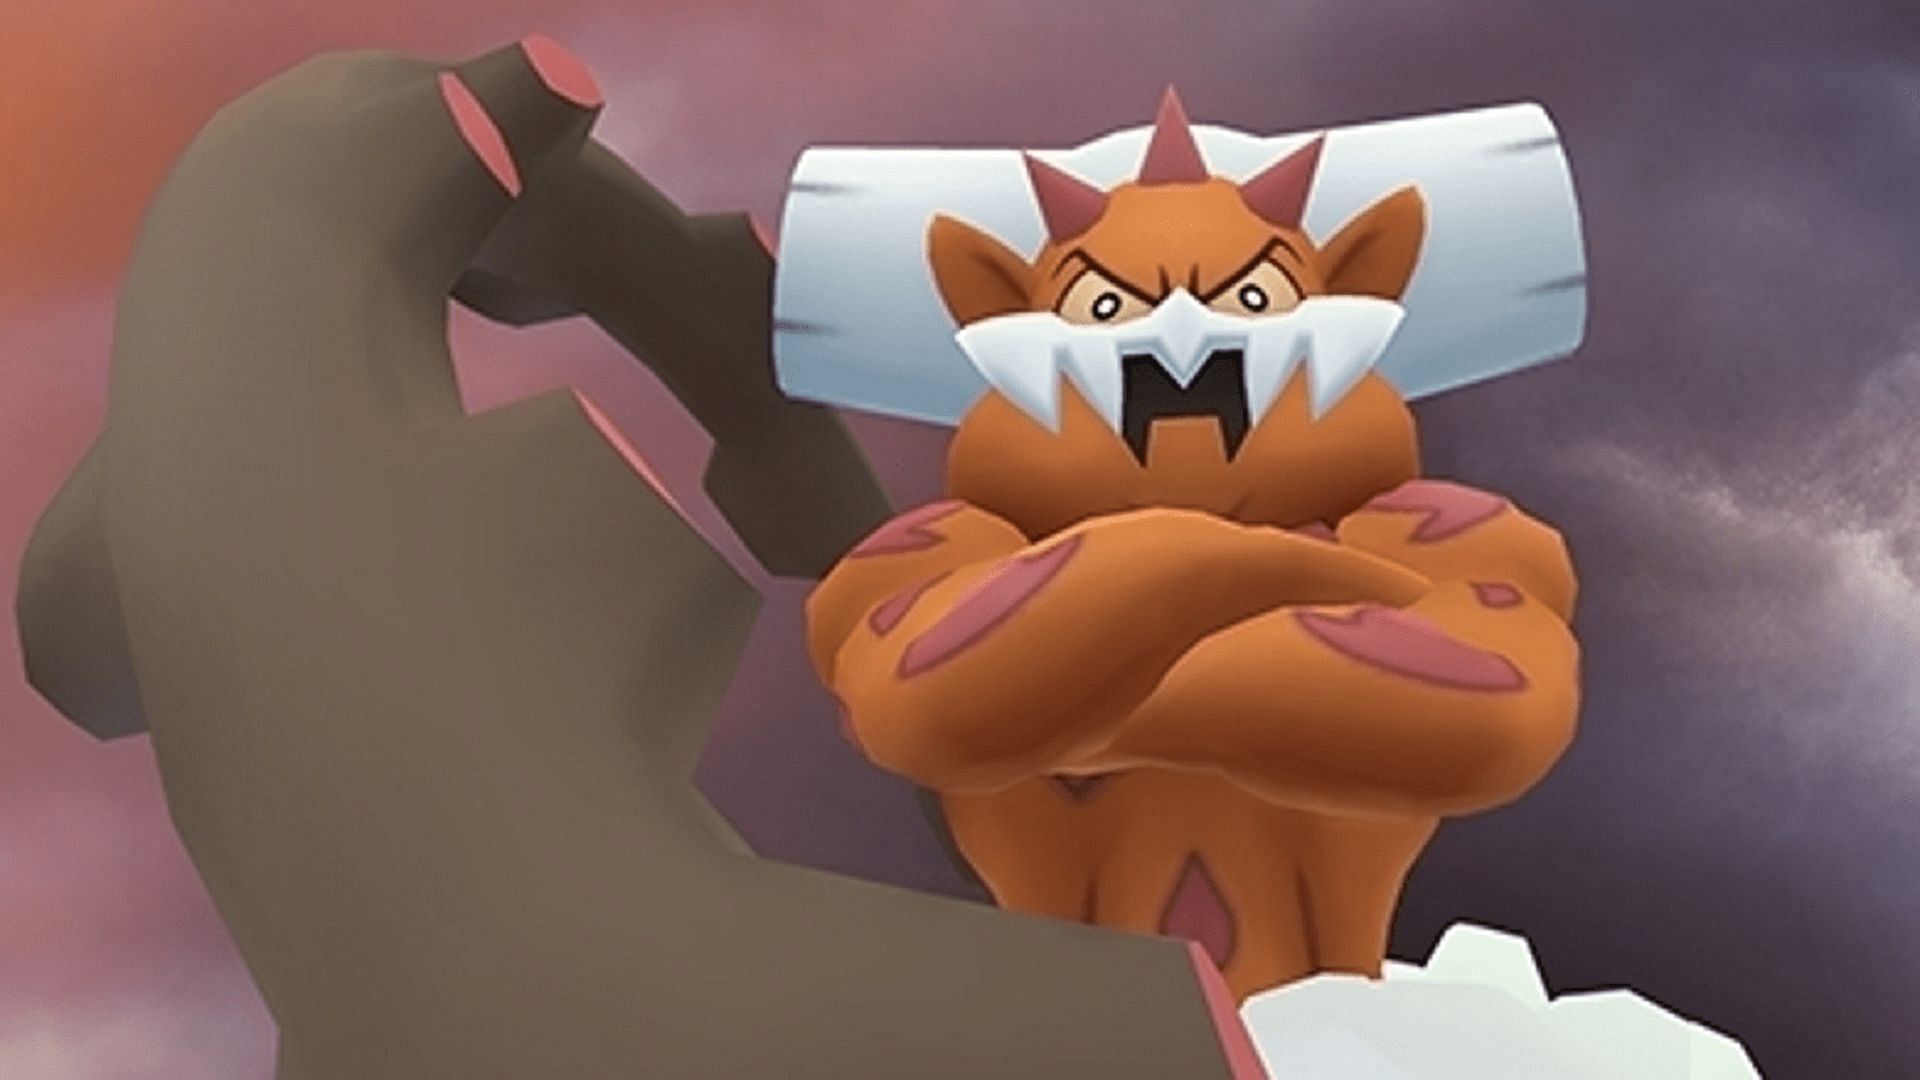 Landorus possesses two forms that trainers can encounter in Pokemon GO: Incarnate and Therian.